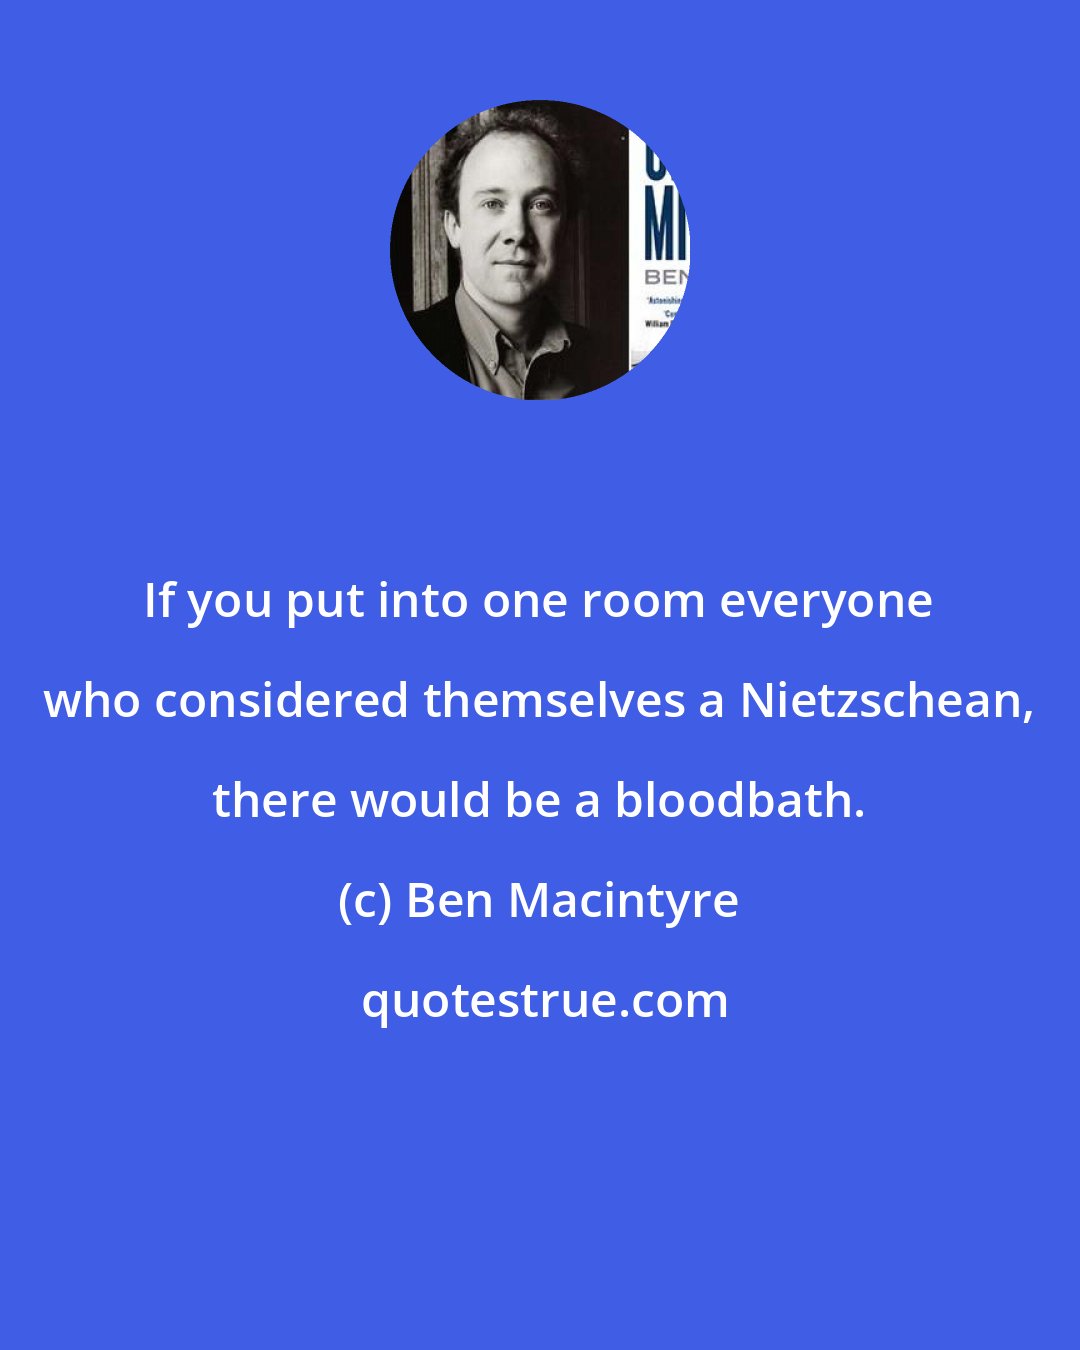 Ben Macintyre: If you put into one room everyone who considered themselves a Nietzschean, there would be a bloodbath.